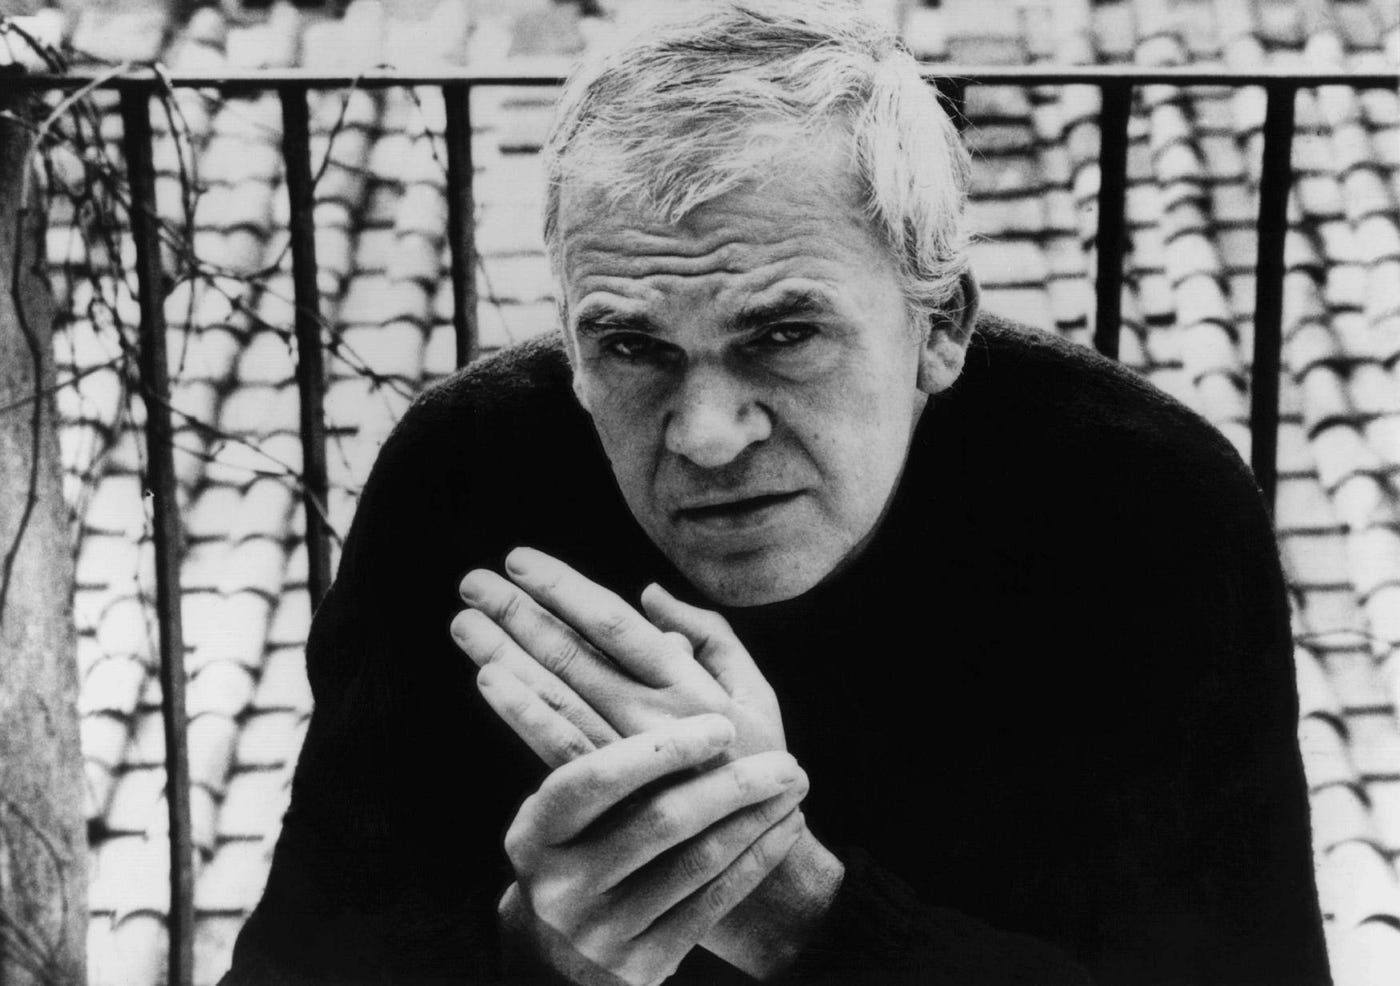 Love and Communism: A Reflection of “The Joke” by Milan Kundera, by Miles  J. Tsue